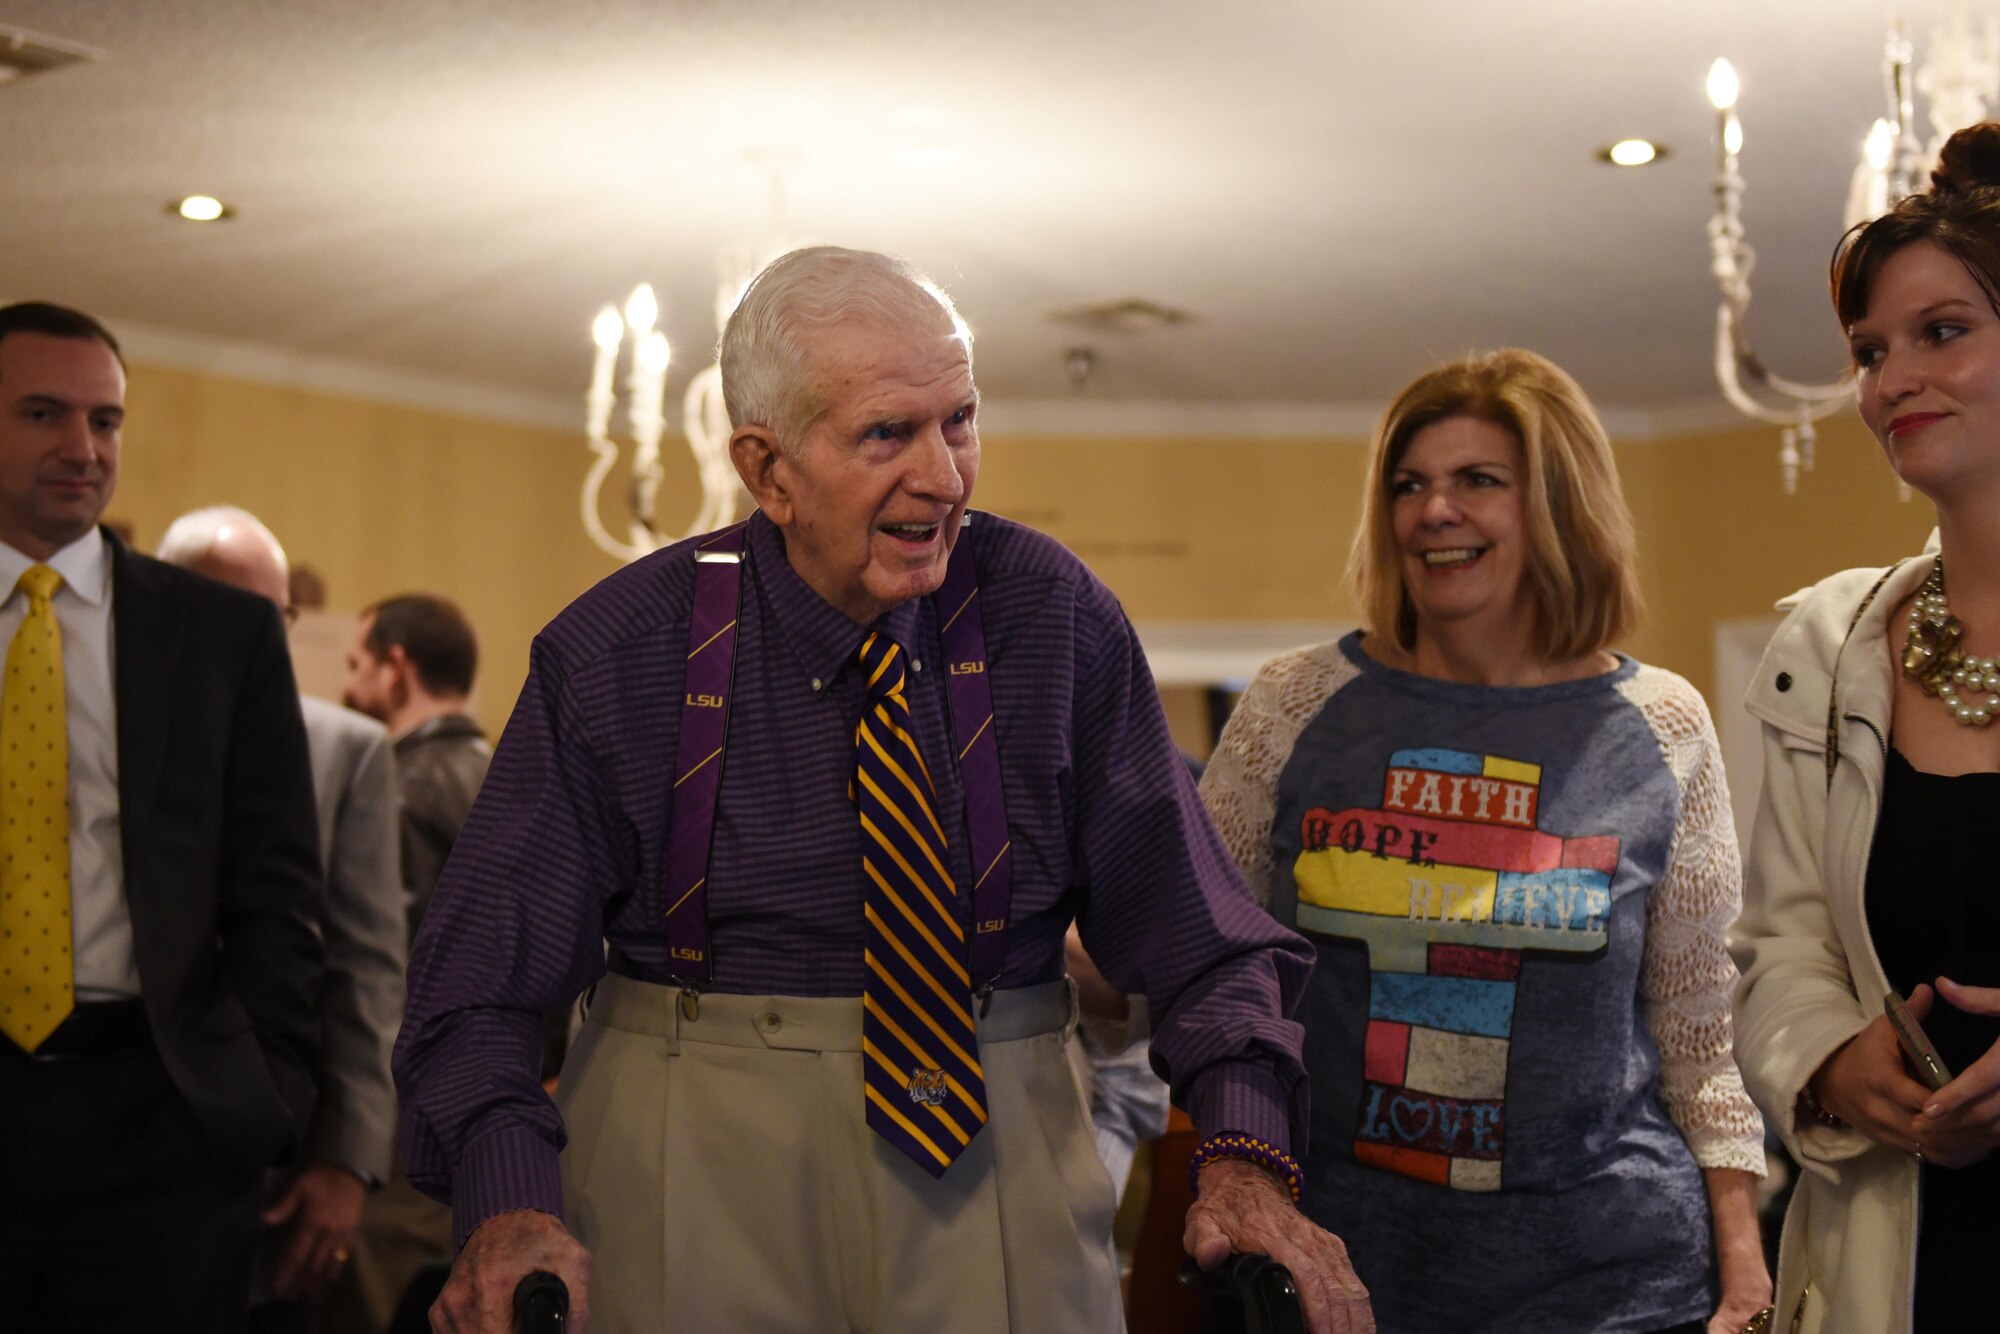 Raymond Odom, 93-year-old World War II veteran, greets friends and family during an event held at Arbor Rose Assisted Living Facility in Farmerville, La., Feb. 2, 2017. Odom served in the 8th Air Force during WWII and lost sight of his dog tags before heading back to the U.S. after the war was over. In May 2016, his dog tags were discovered in England, and sent to Louisiana where they were presented to him by the 8th Air Force commander, U.S. Air Force Maj. Gen. Thomas Bussiere. (U.S. Air Force photo by Senior Airman Erin Trower)